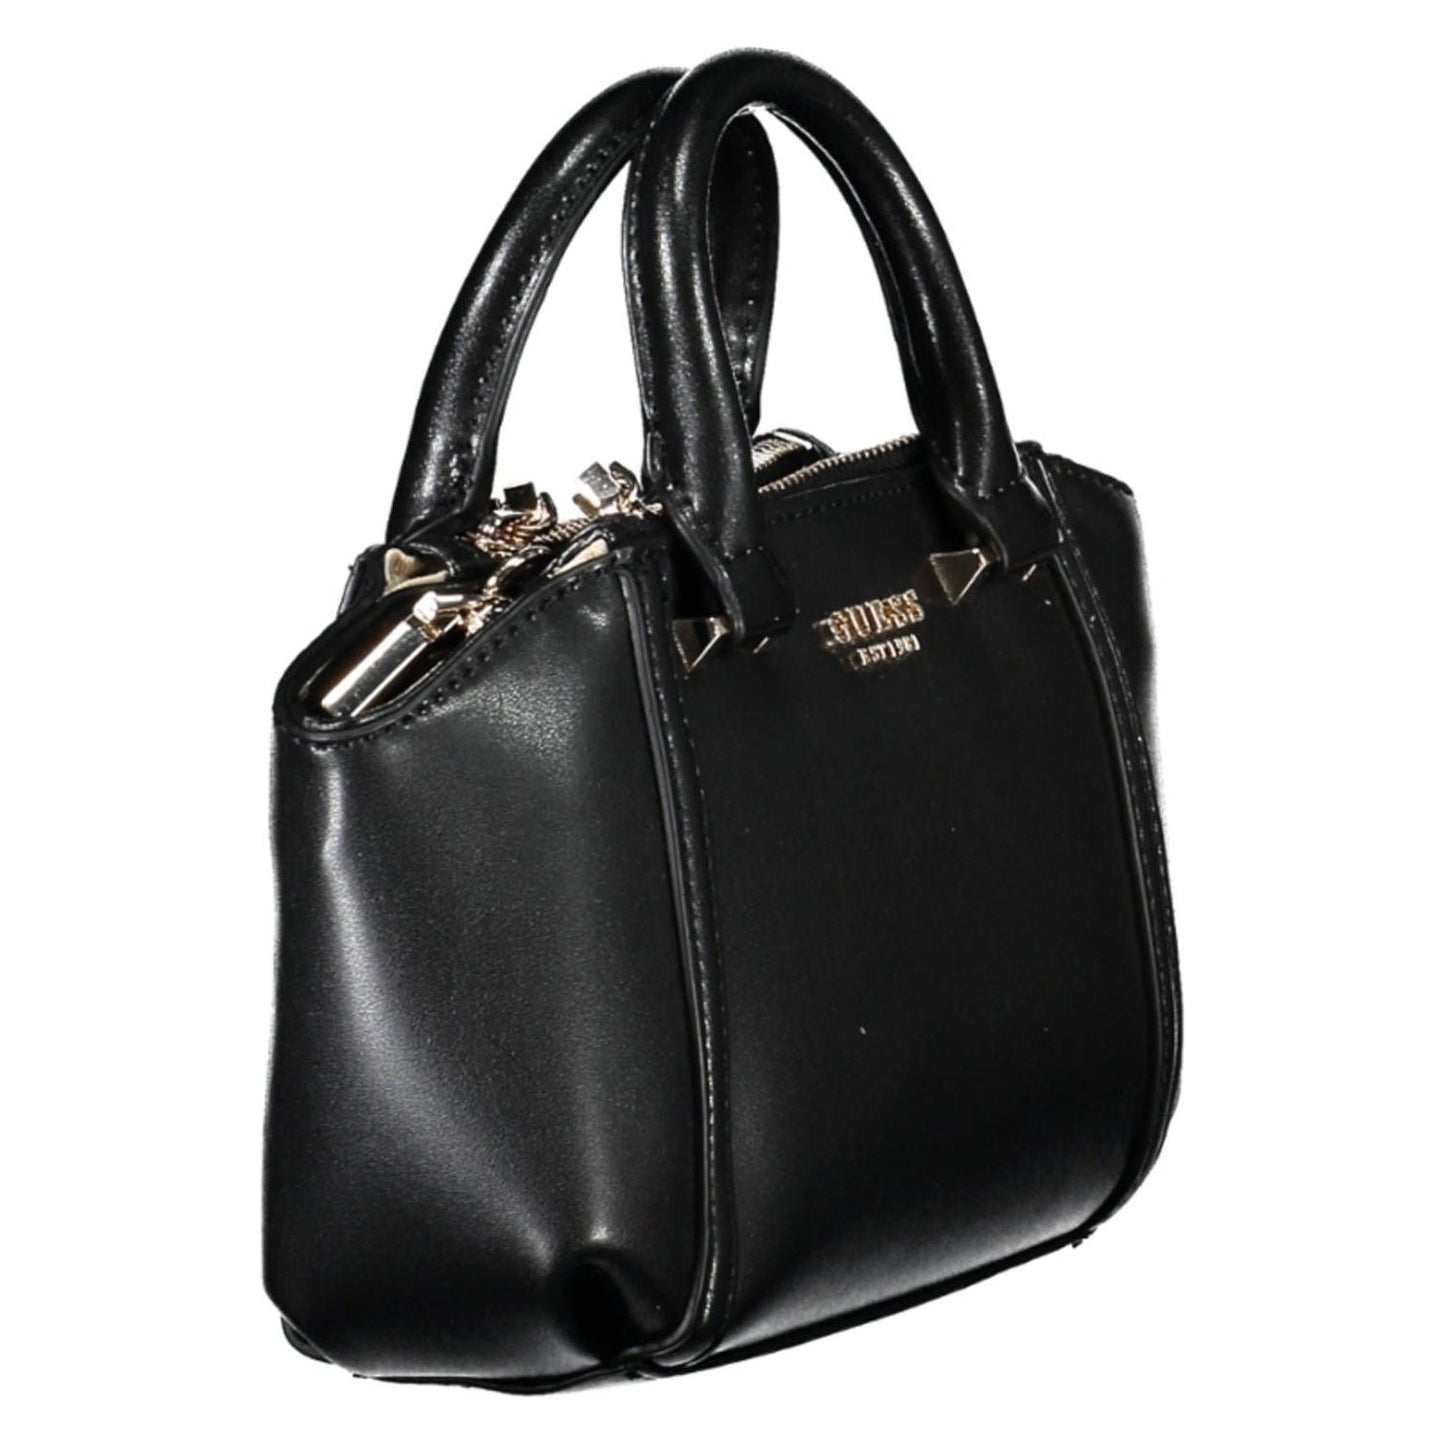 Guess Jeans Chic Black Contrasting Detail Tote Bag chic-black-contrasting-detail-tote-bag